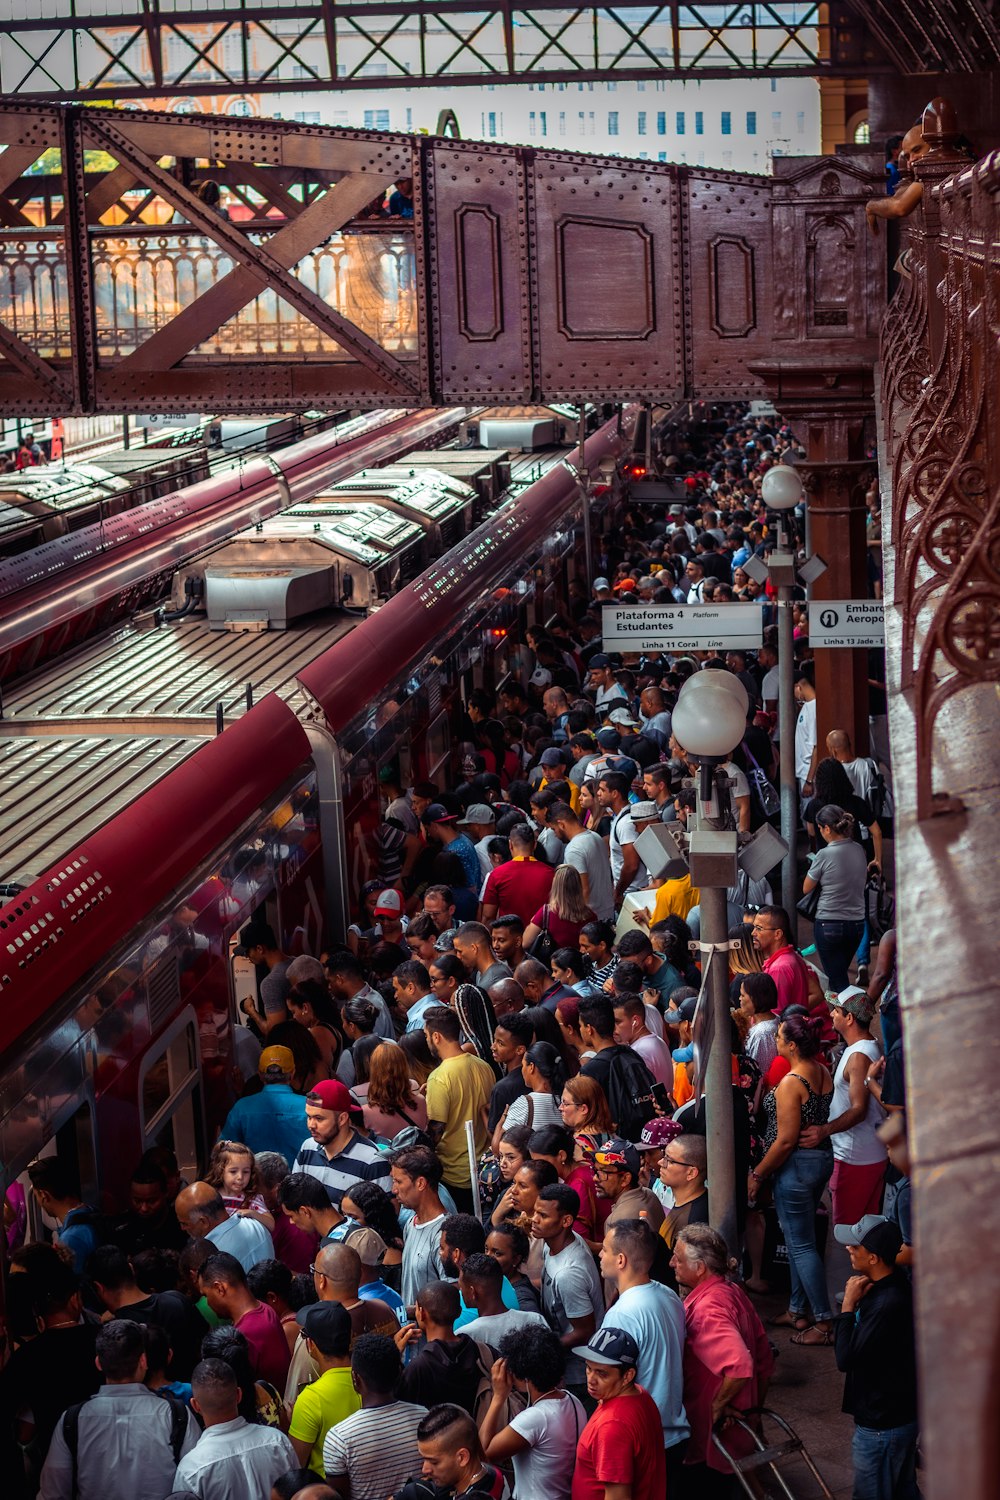 a crowd of people standing next to a train at a train station